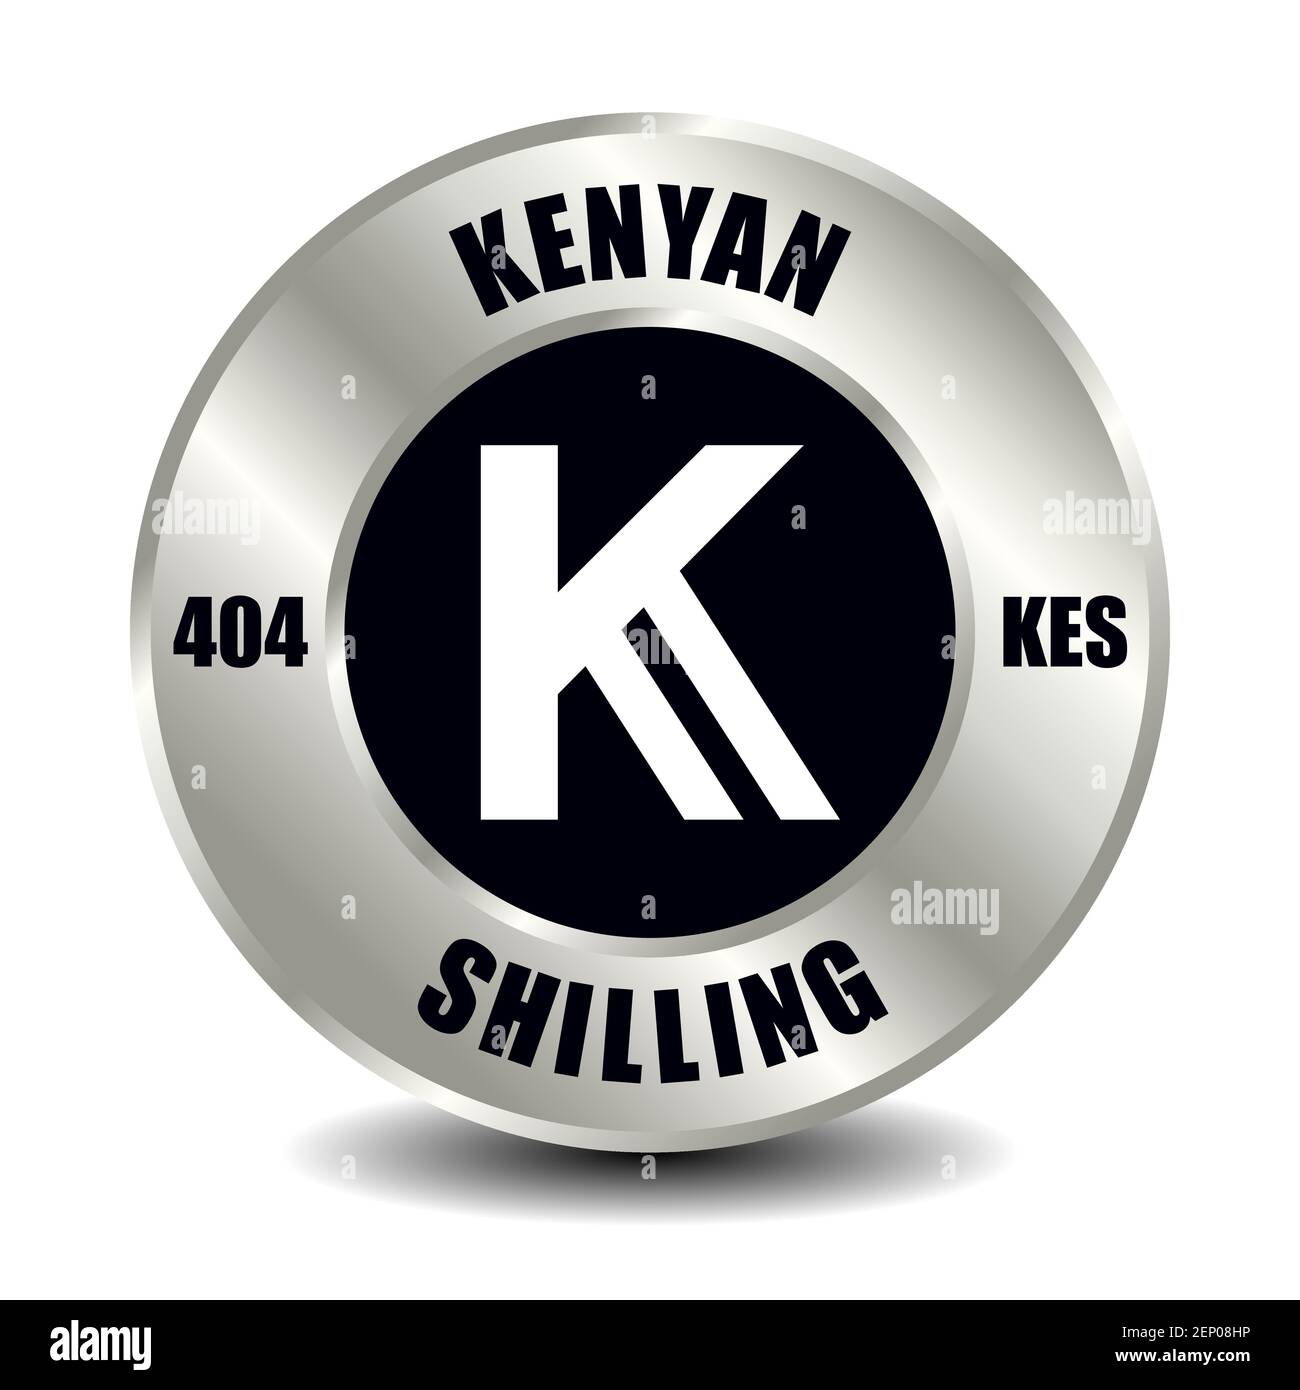 Kenya money icon isolated on round silver coin. Vector sign of currency symbol with international ISO code and abbreviation Stock Vector